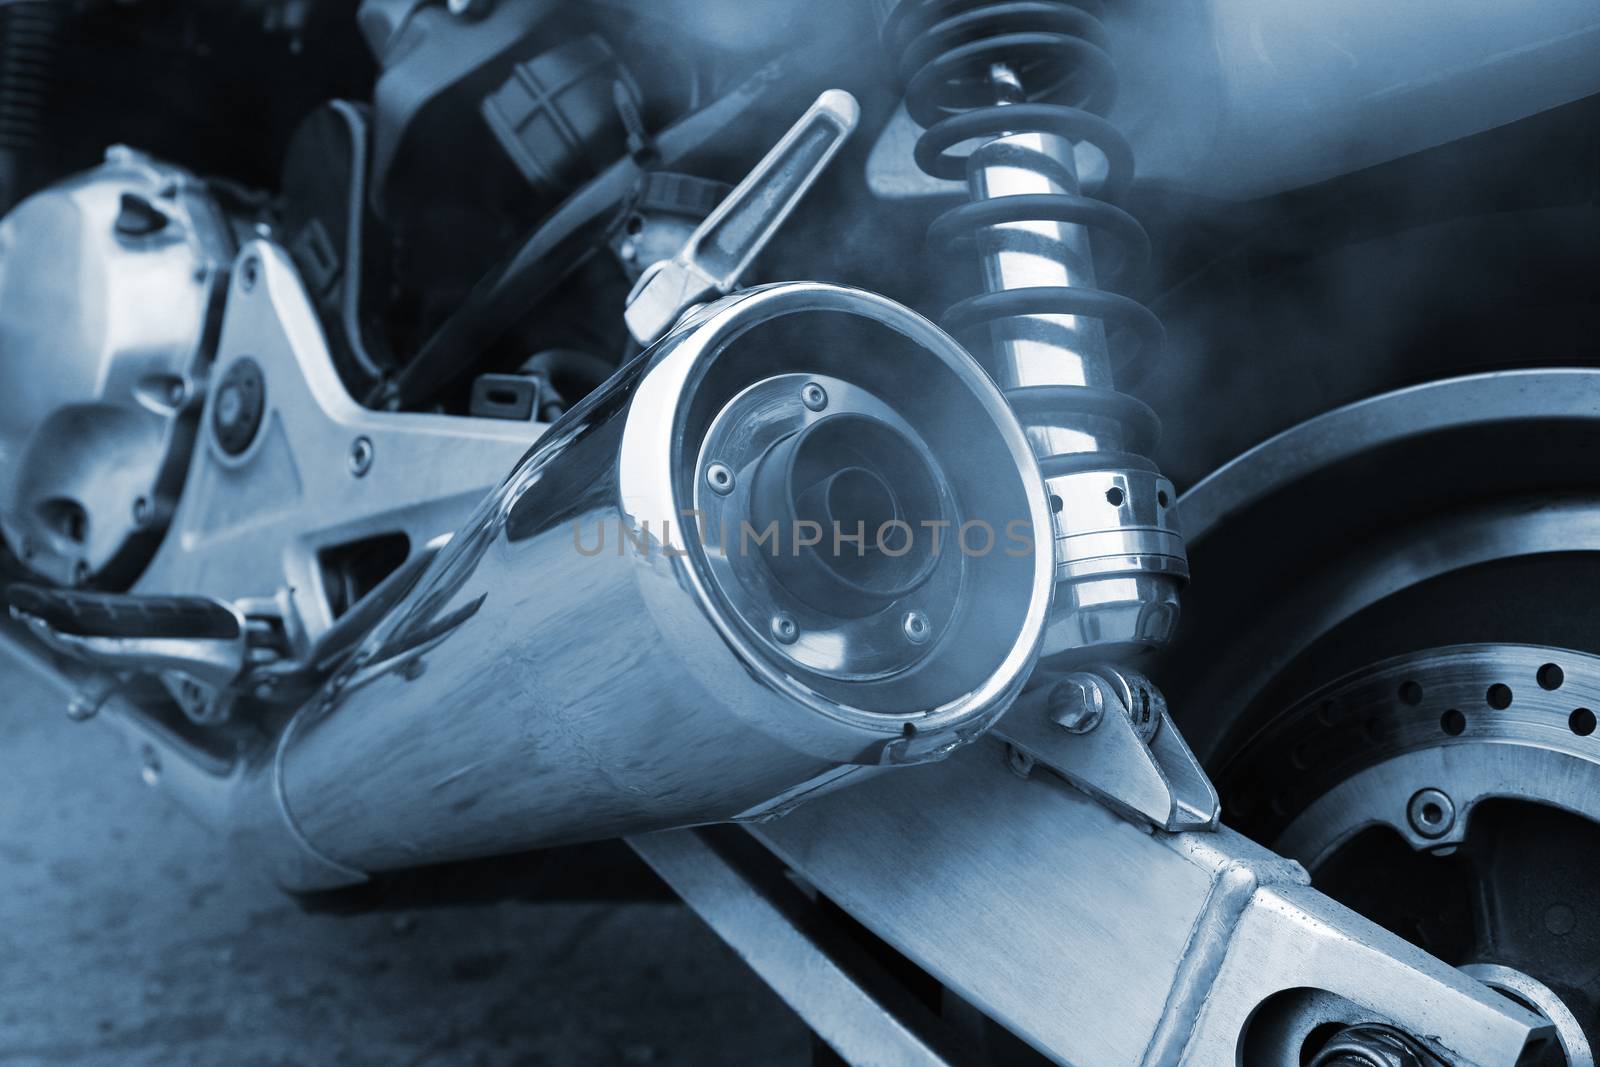 The working muffler of a modern motorcycle